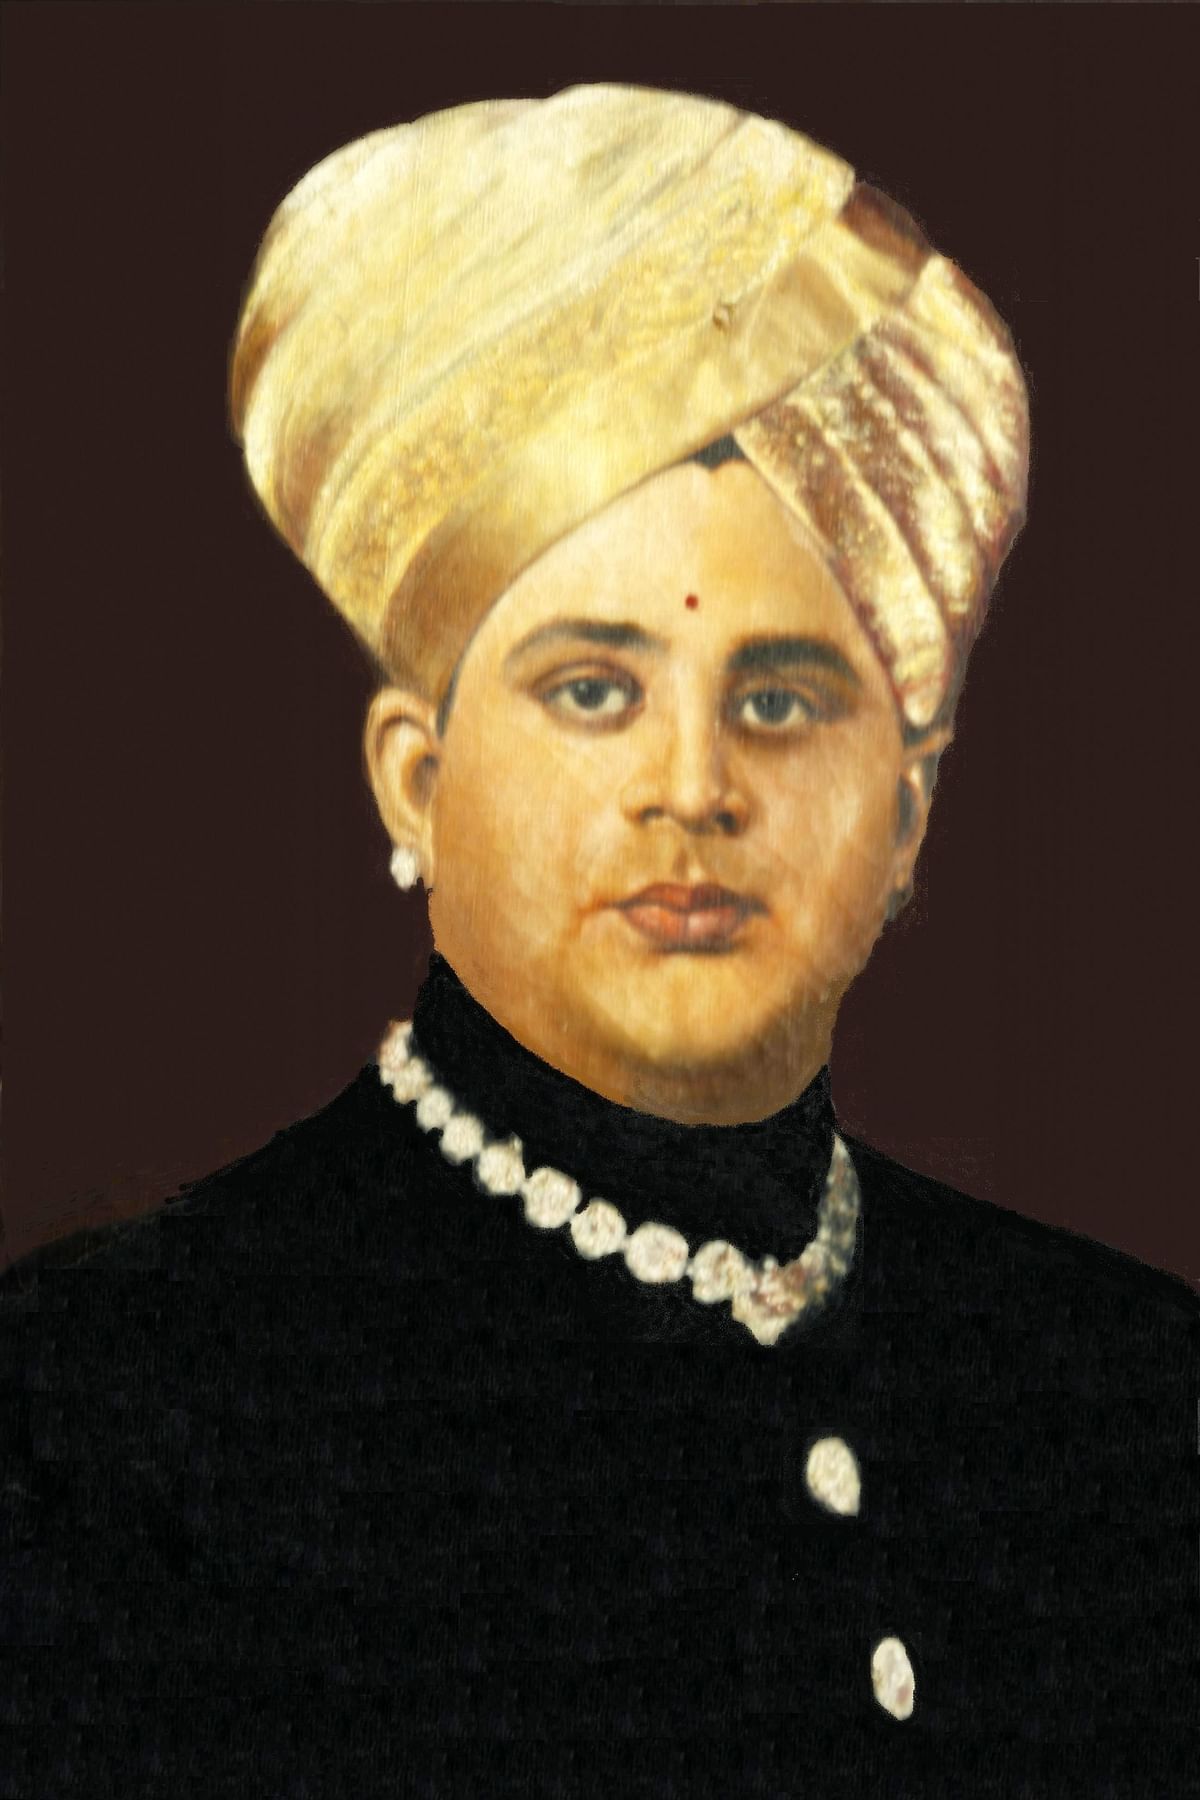 A series on the man behind the maharaja